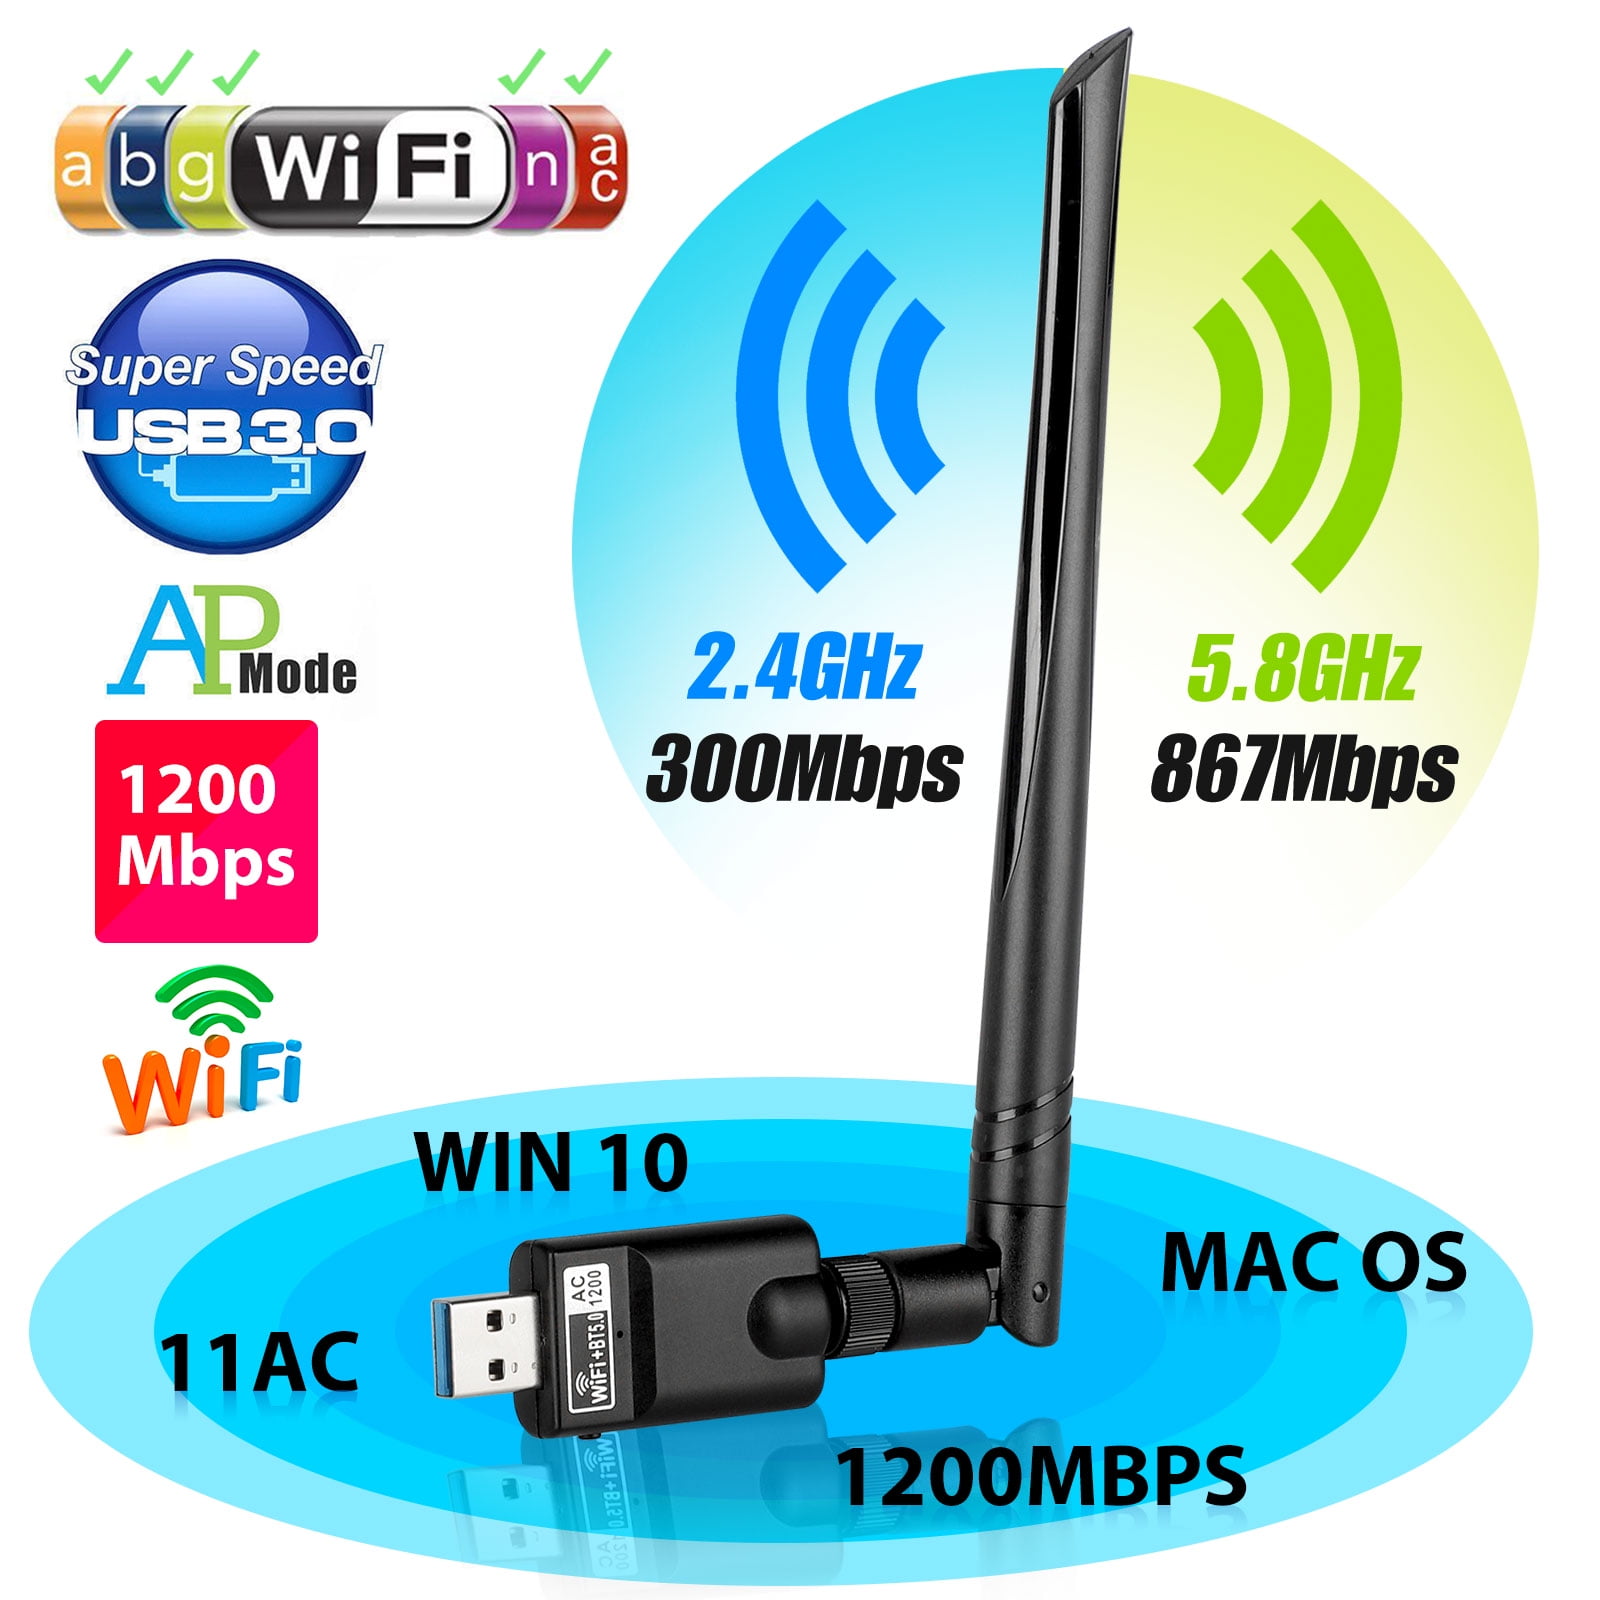 Aigital 1200Mbps WiFi Dongle With USB3.0 Stand Base Dual Band High Gain Dual 5dBi Antennas Network LAN Card Dongle WiFi USB 3.0 for Desktop Laptop,Supports Windows 10/8/7/XP Wireless USB WiFi Adapter 